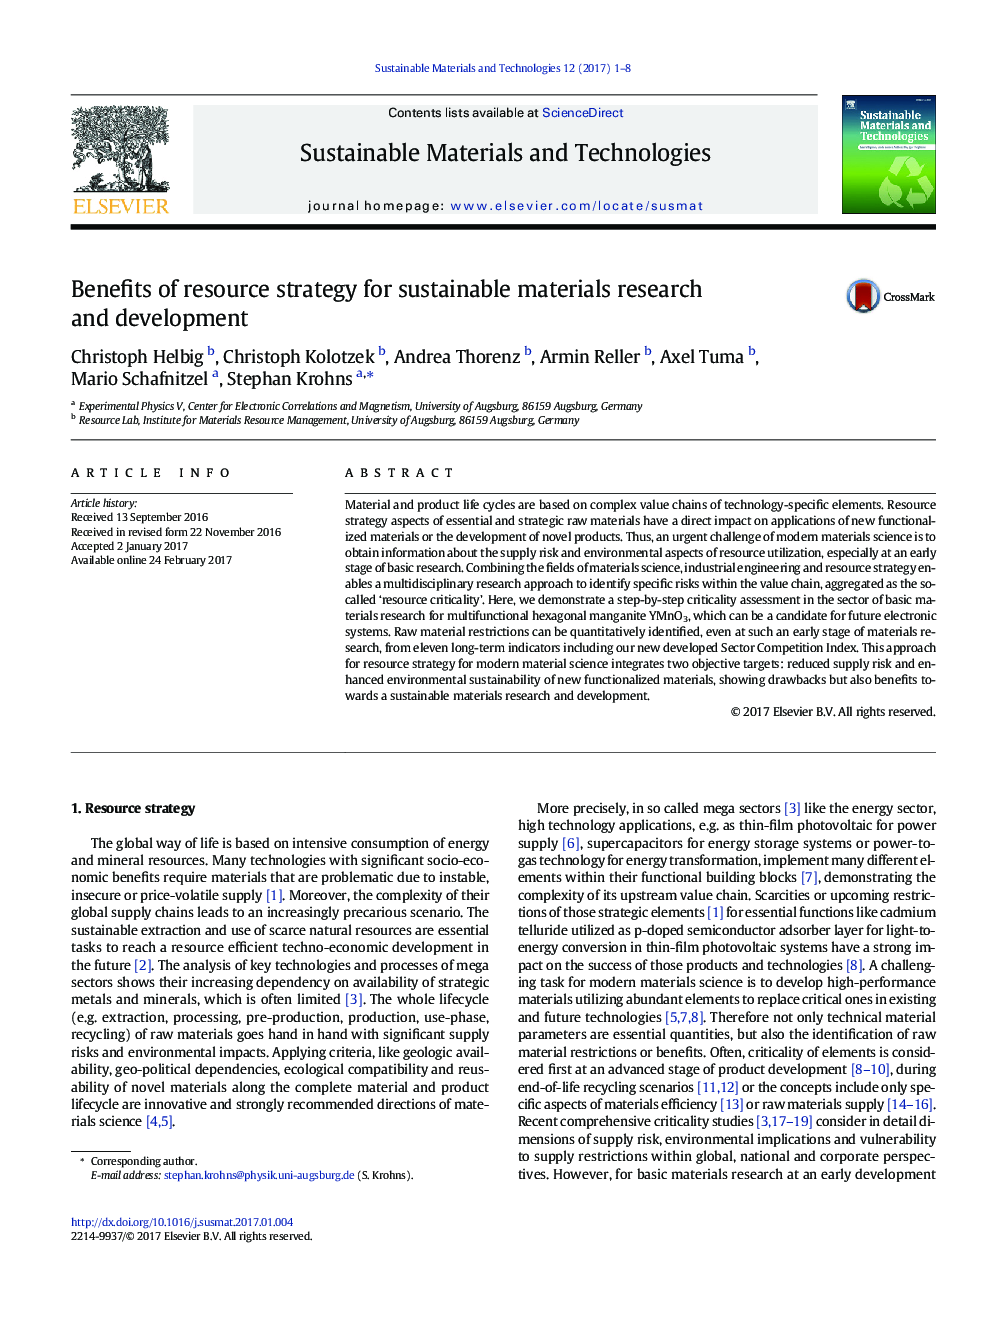 Benefits of resource strategy for sustainable materials research and development